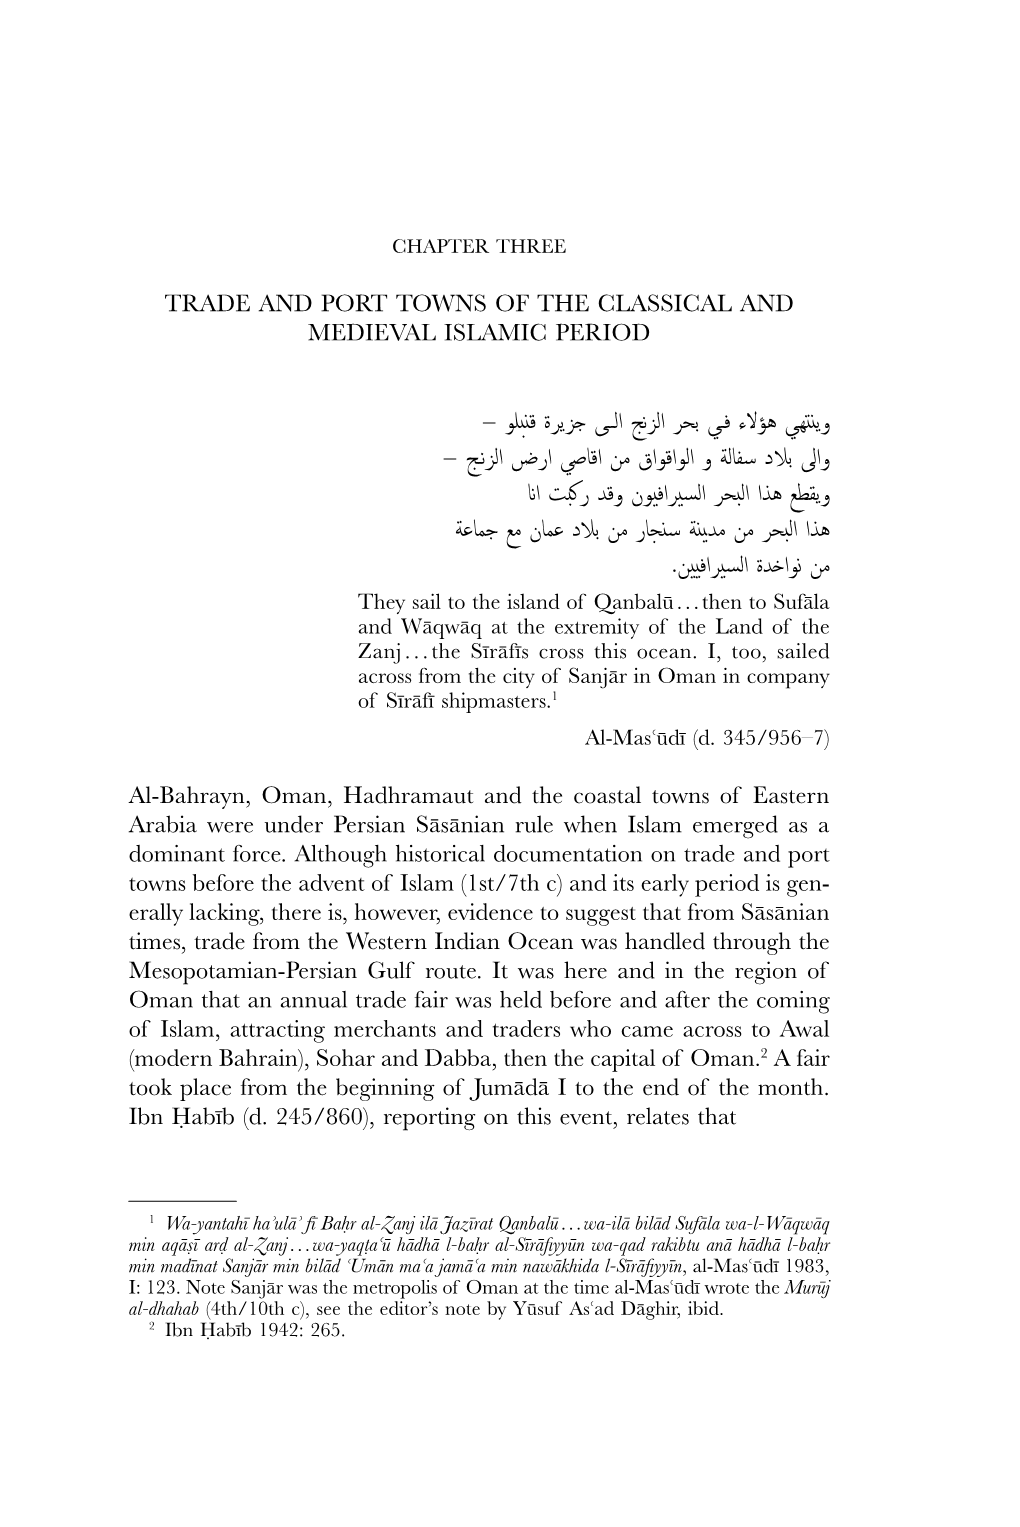 Trade and Port Towns of the Classical and Medieval Islamic Period